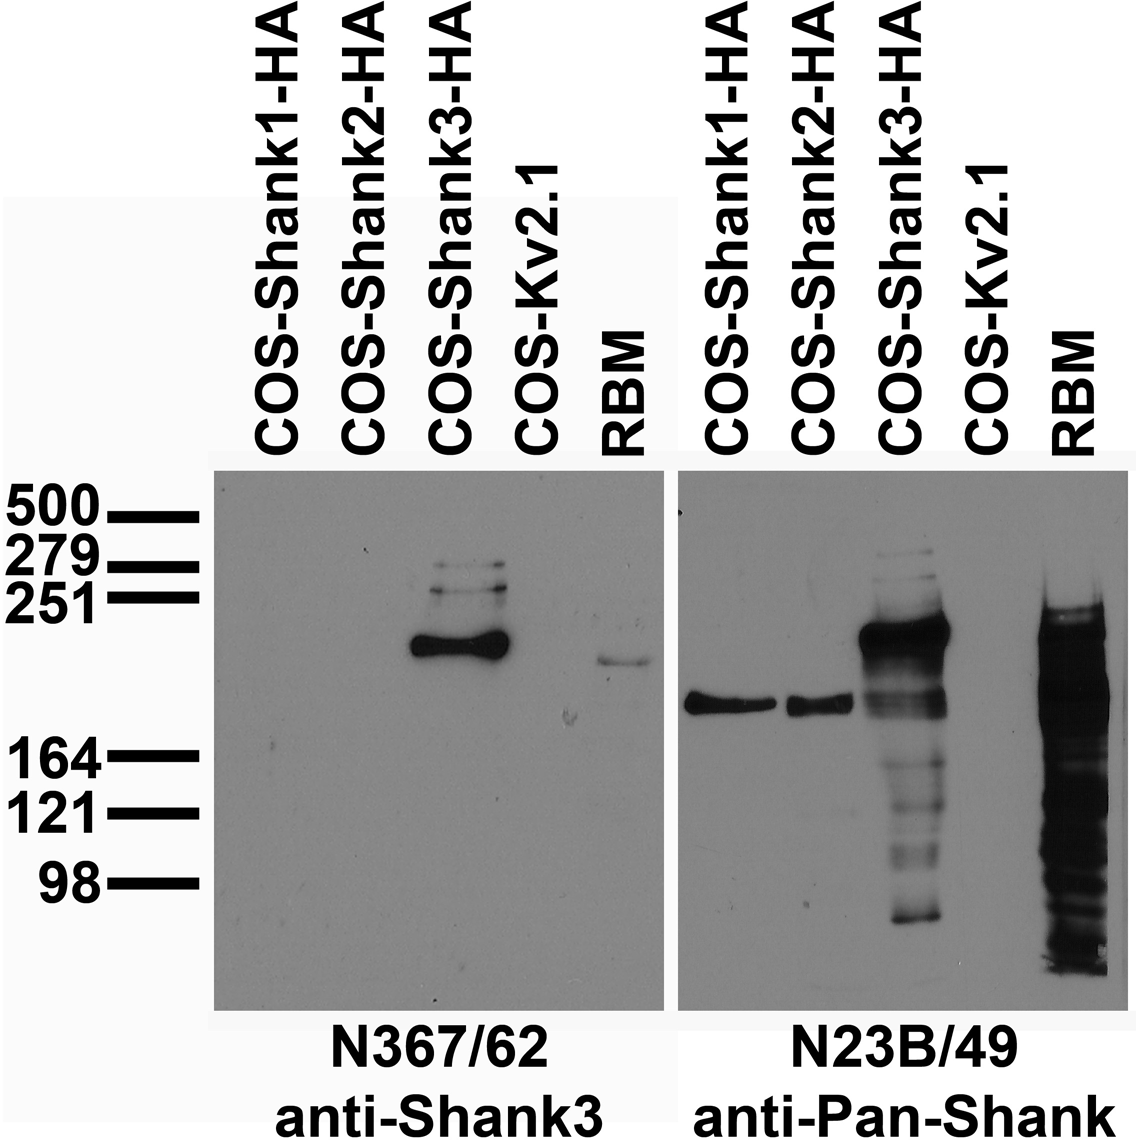 Adult rat brain membrane (RBM) and transfected cell immunoblot: extracts of RBM and COS cells transiently transfected with HA-tagged Shank1, Shank2, Shank3 or untagged Kv2.1 plasmid and probed with N367/62 (left) or N23B/49 (right) TC supe.